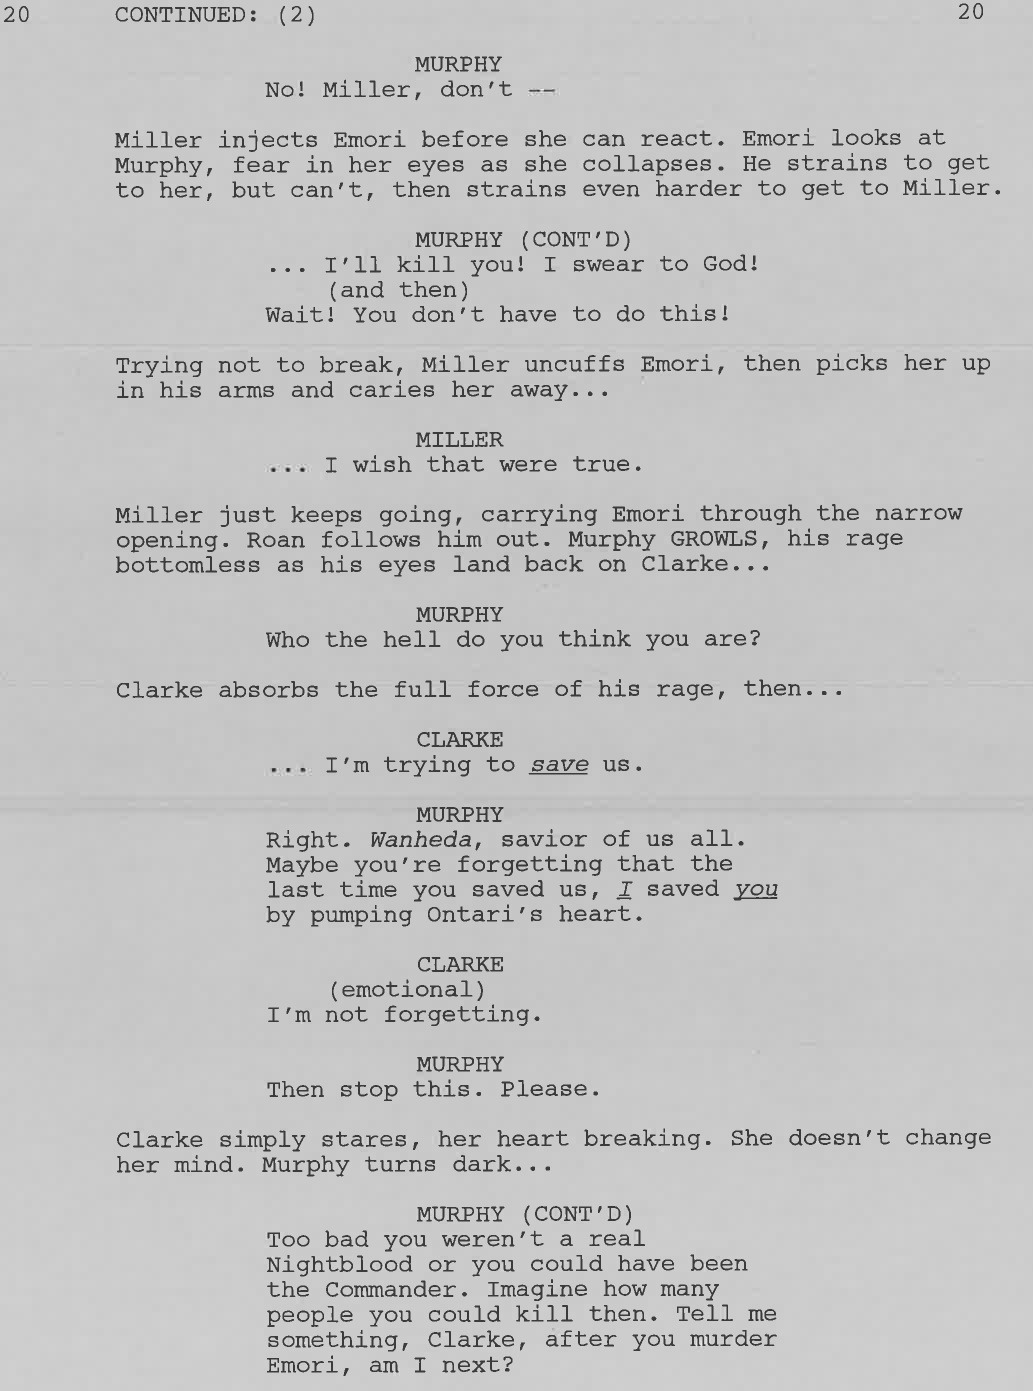 Happy Wednesday!  For today’s Script to Screen please enjoy this scene from “God